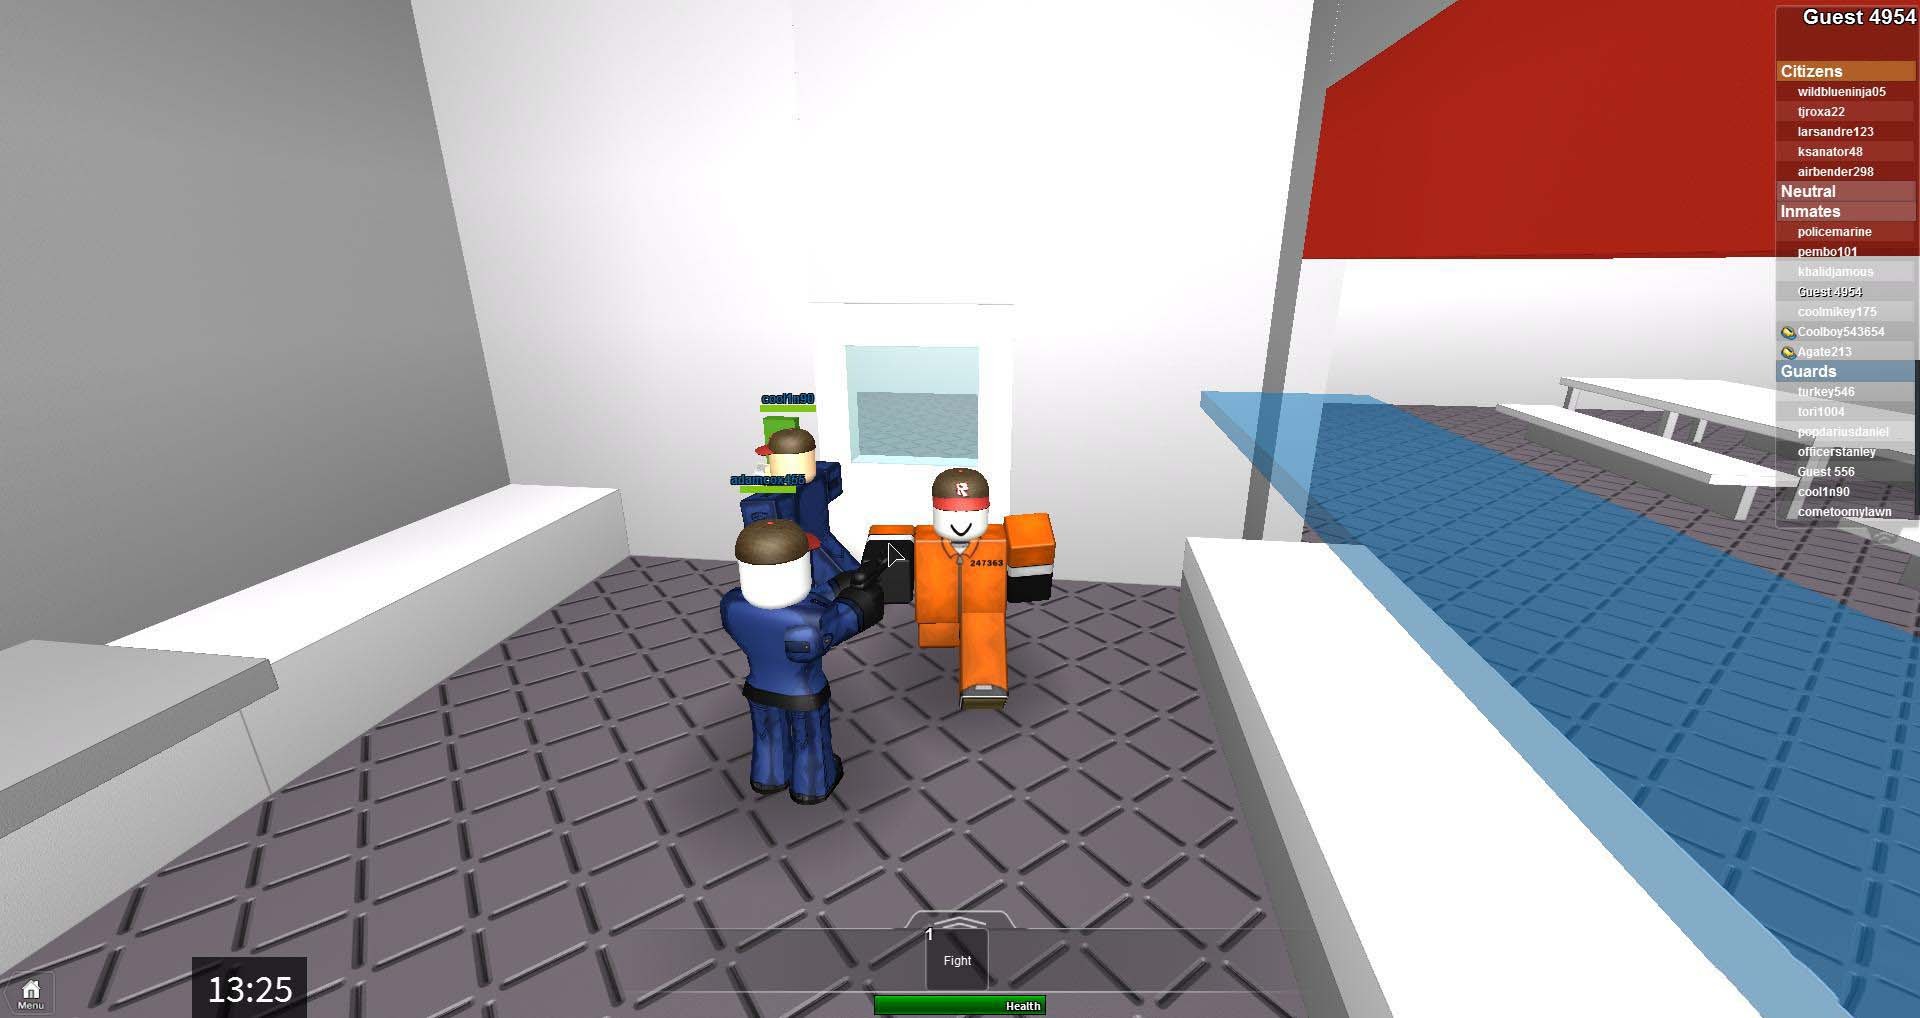 How to Get 800 ROBUX for FREE in this game - Roblox 